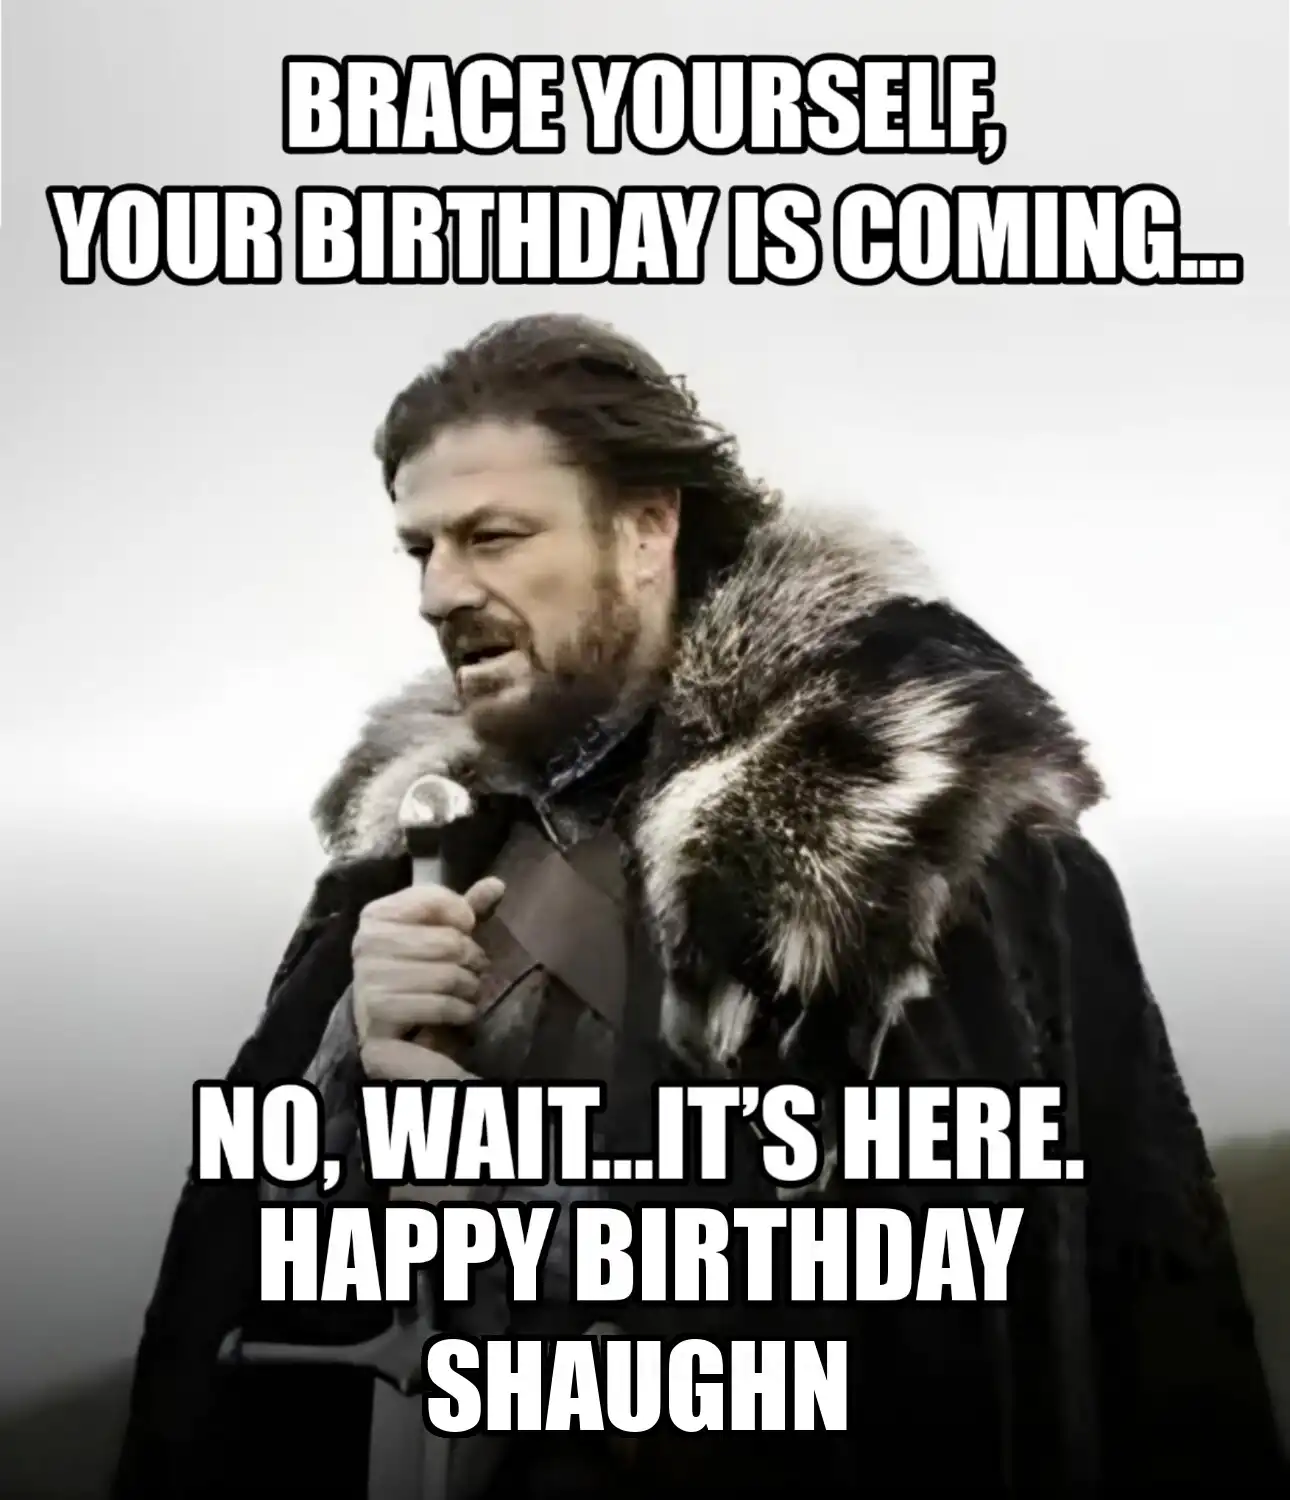 Happy Birthday Shaughn Brace Yourself Your Birthday Is Coming Meme